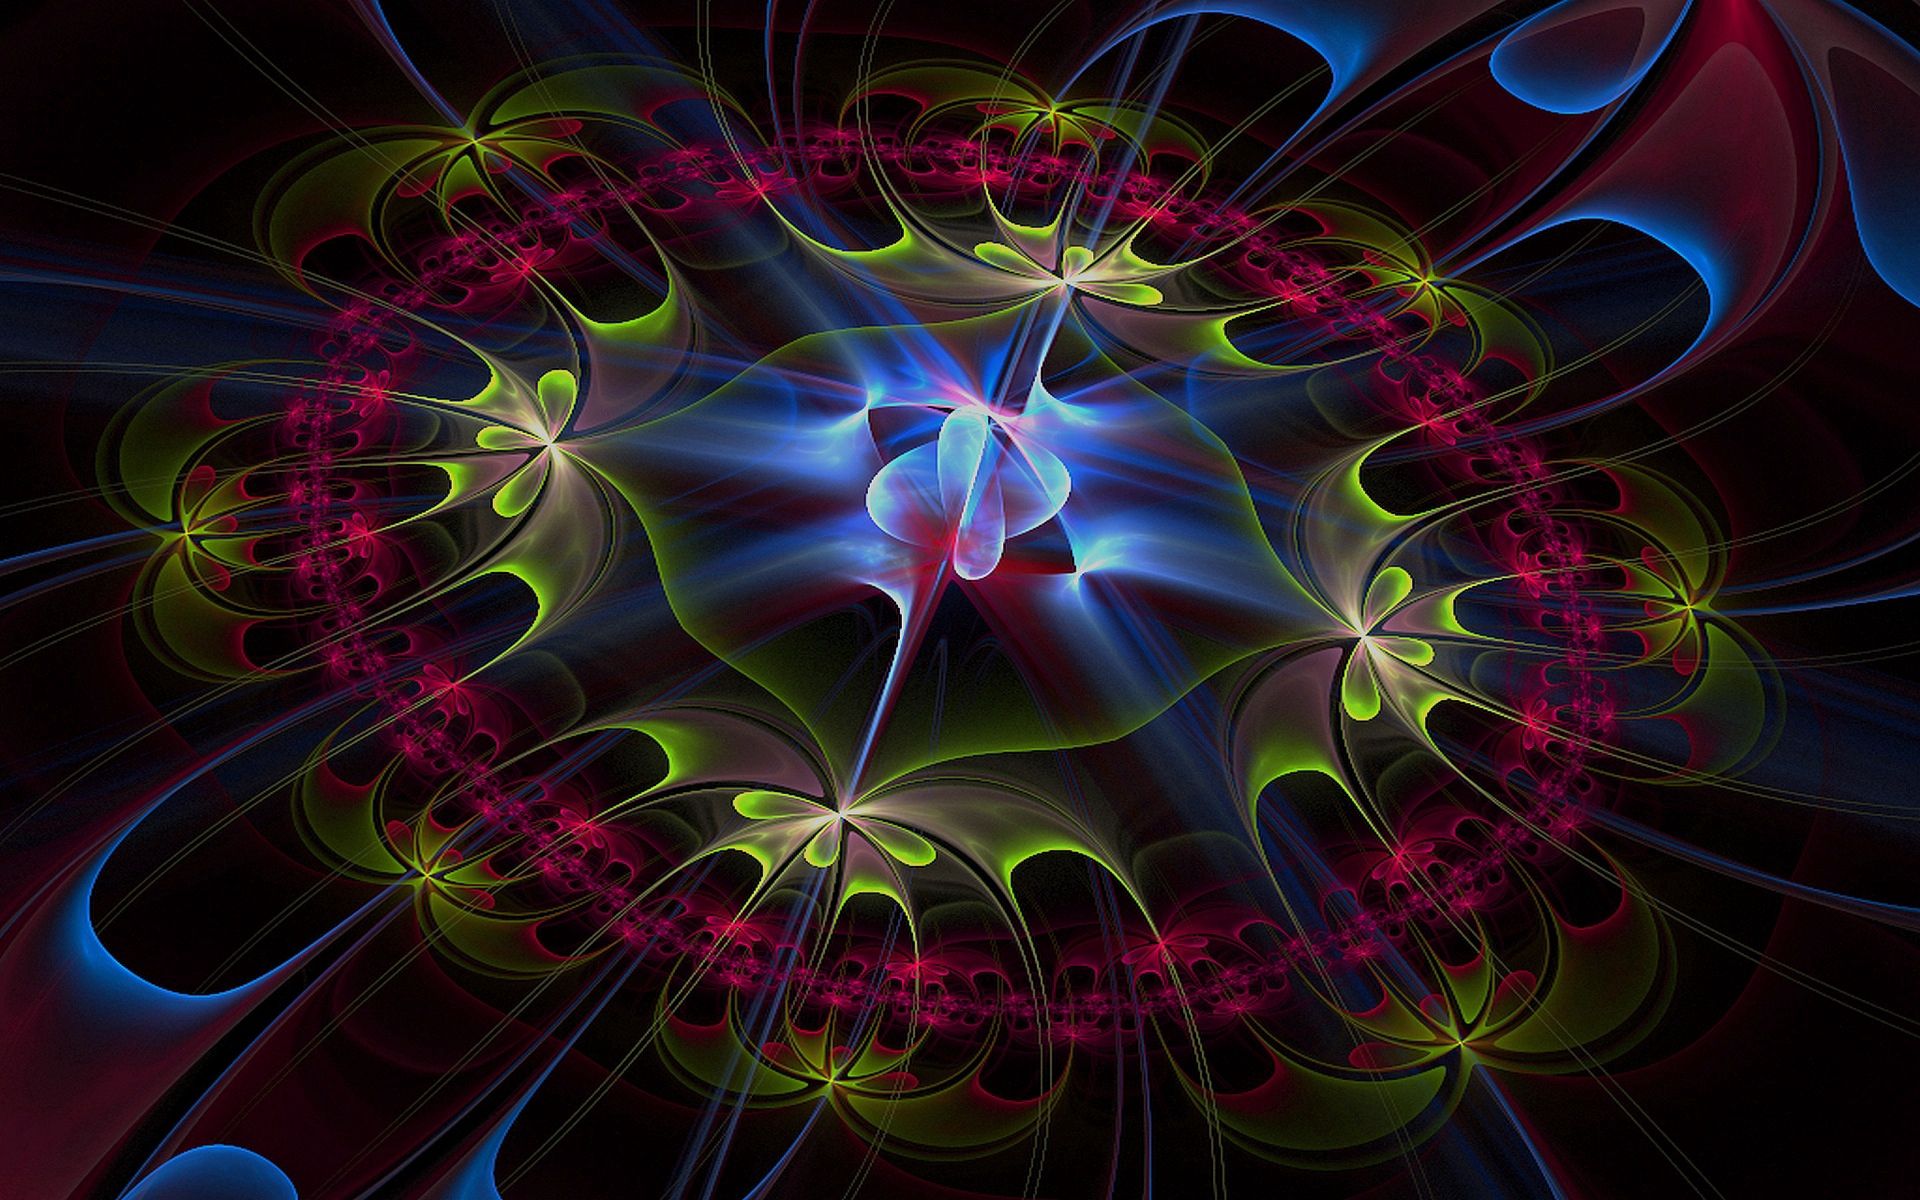 135012 free wallpaper 320x480 for phone, download images colourful, flowers, fractal, patterns 320x480 for mobile